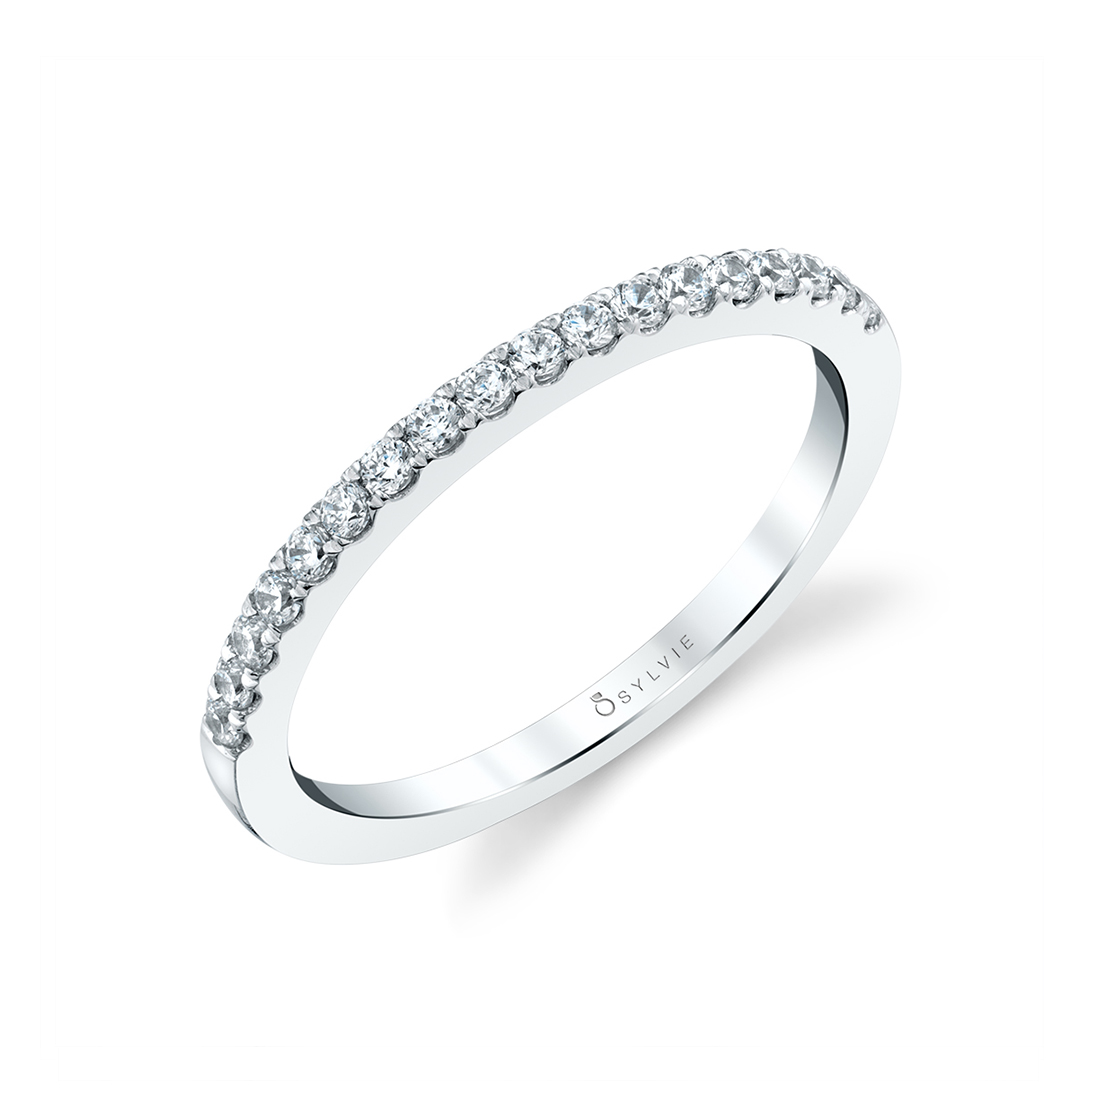 Pave Wedding Band in White Gold